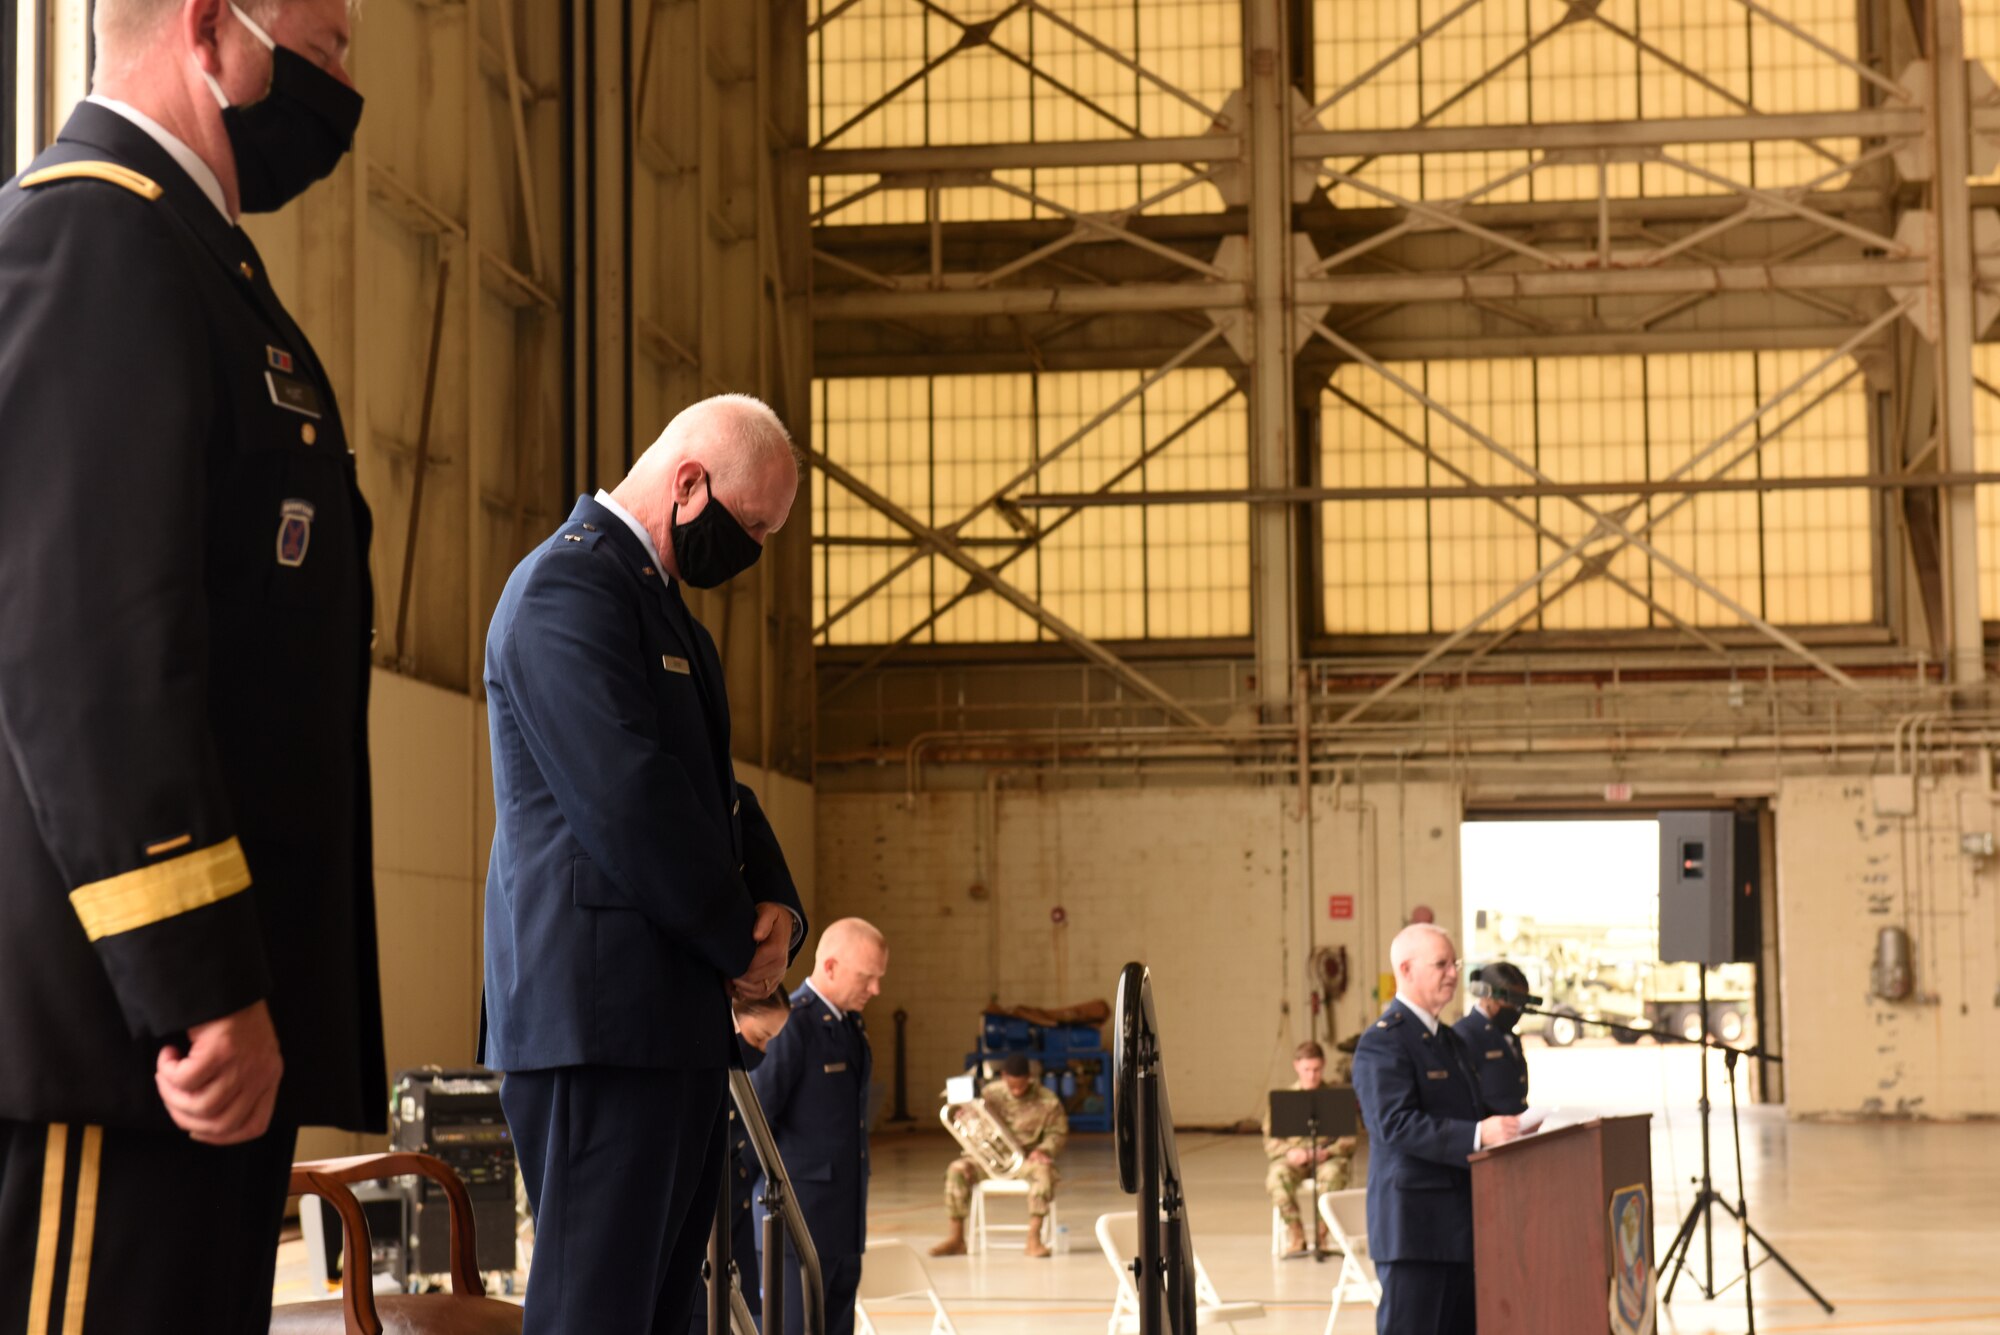 U.S. Air Force Chaplain, Lt. Col. Jeffrey Kidd (right), gives a closing prayer during the promotion ceremony of U.S. Air Force Brig. Gen. Allan R. Cecil (center), North Carolina National Guard Chief of Staff, held at the North Carolina Air National Guard Base, Charlotte Douglas International Airport, July 18, 2020. Family, friends, and guard members gather to watch Col. Cecil pin on the rank of Brigadier General.